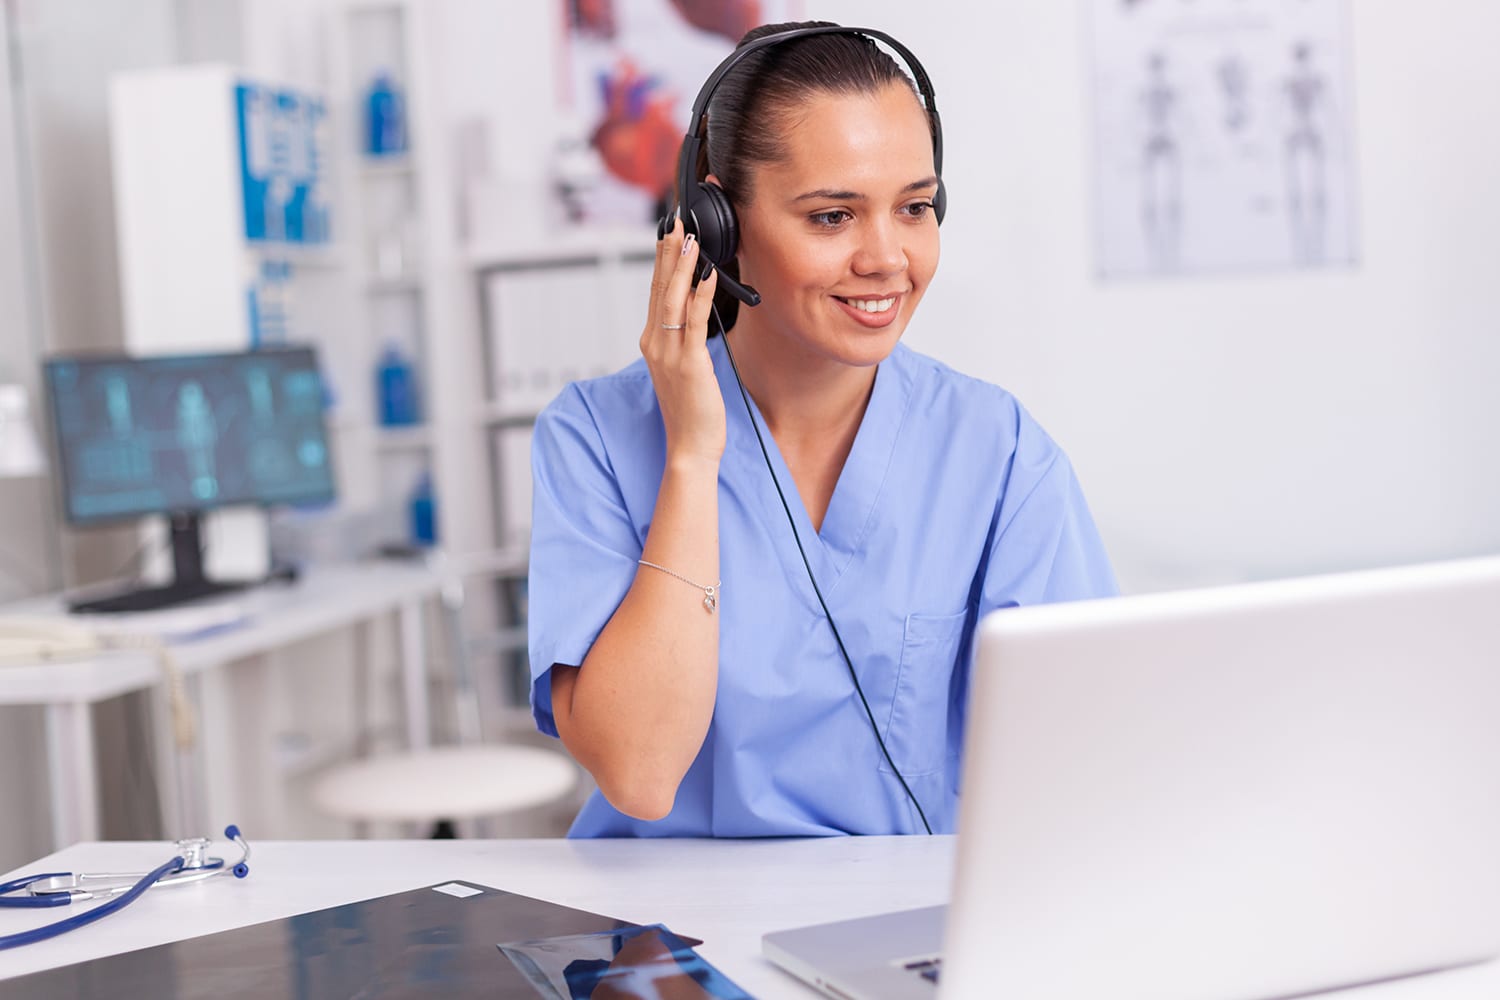 Medical staff talking with patient about prescription wearing headset with microphone in hospital office. Health care physician sitting at desk using computer in modern clinic looking at monitor.